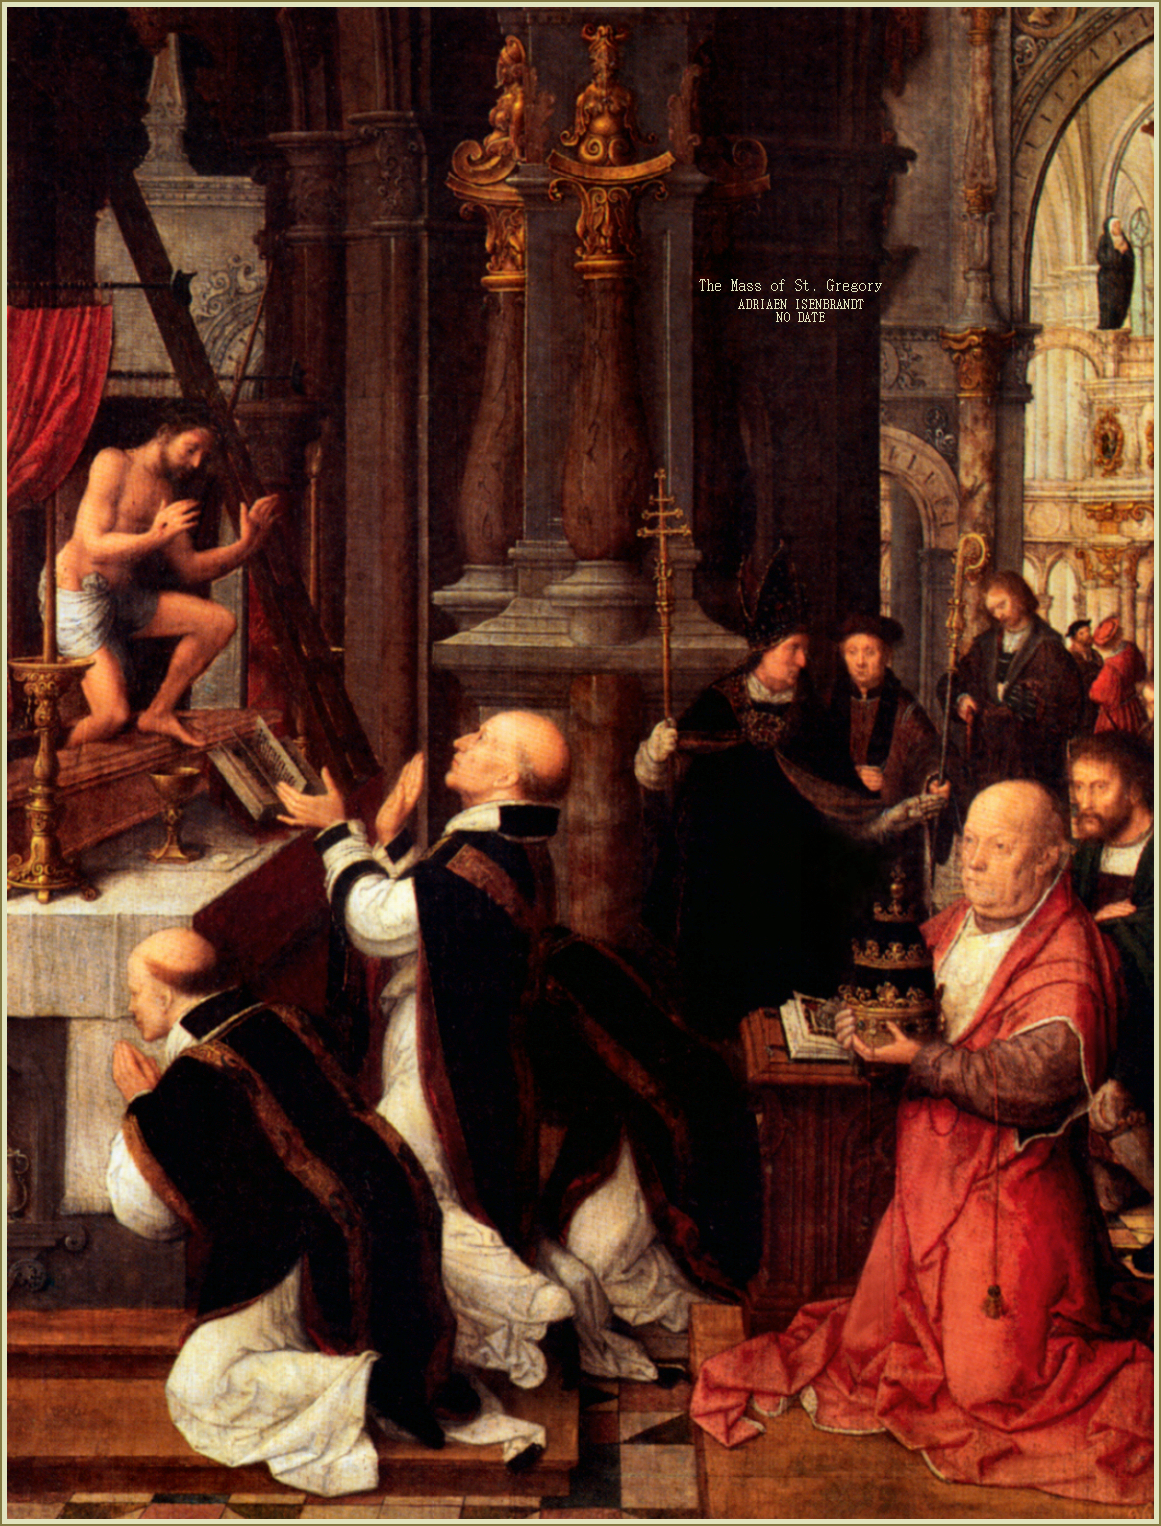 MASS OF ST. GREGORY